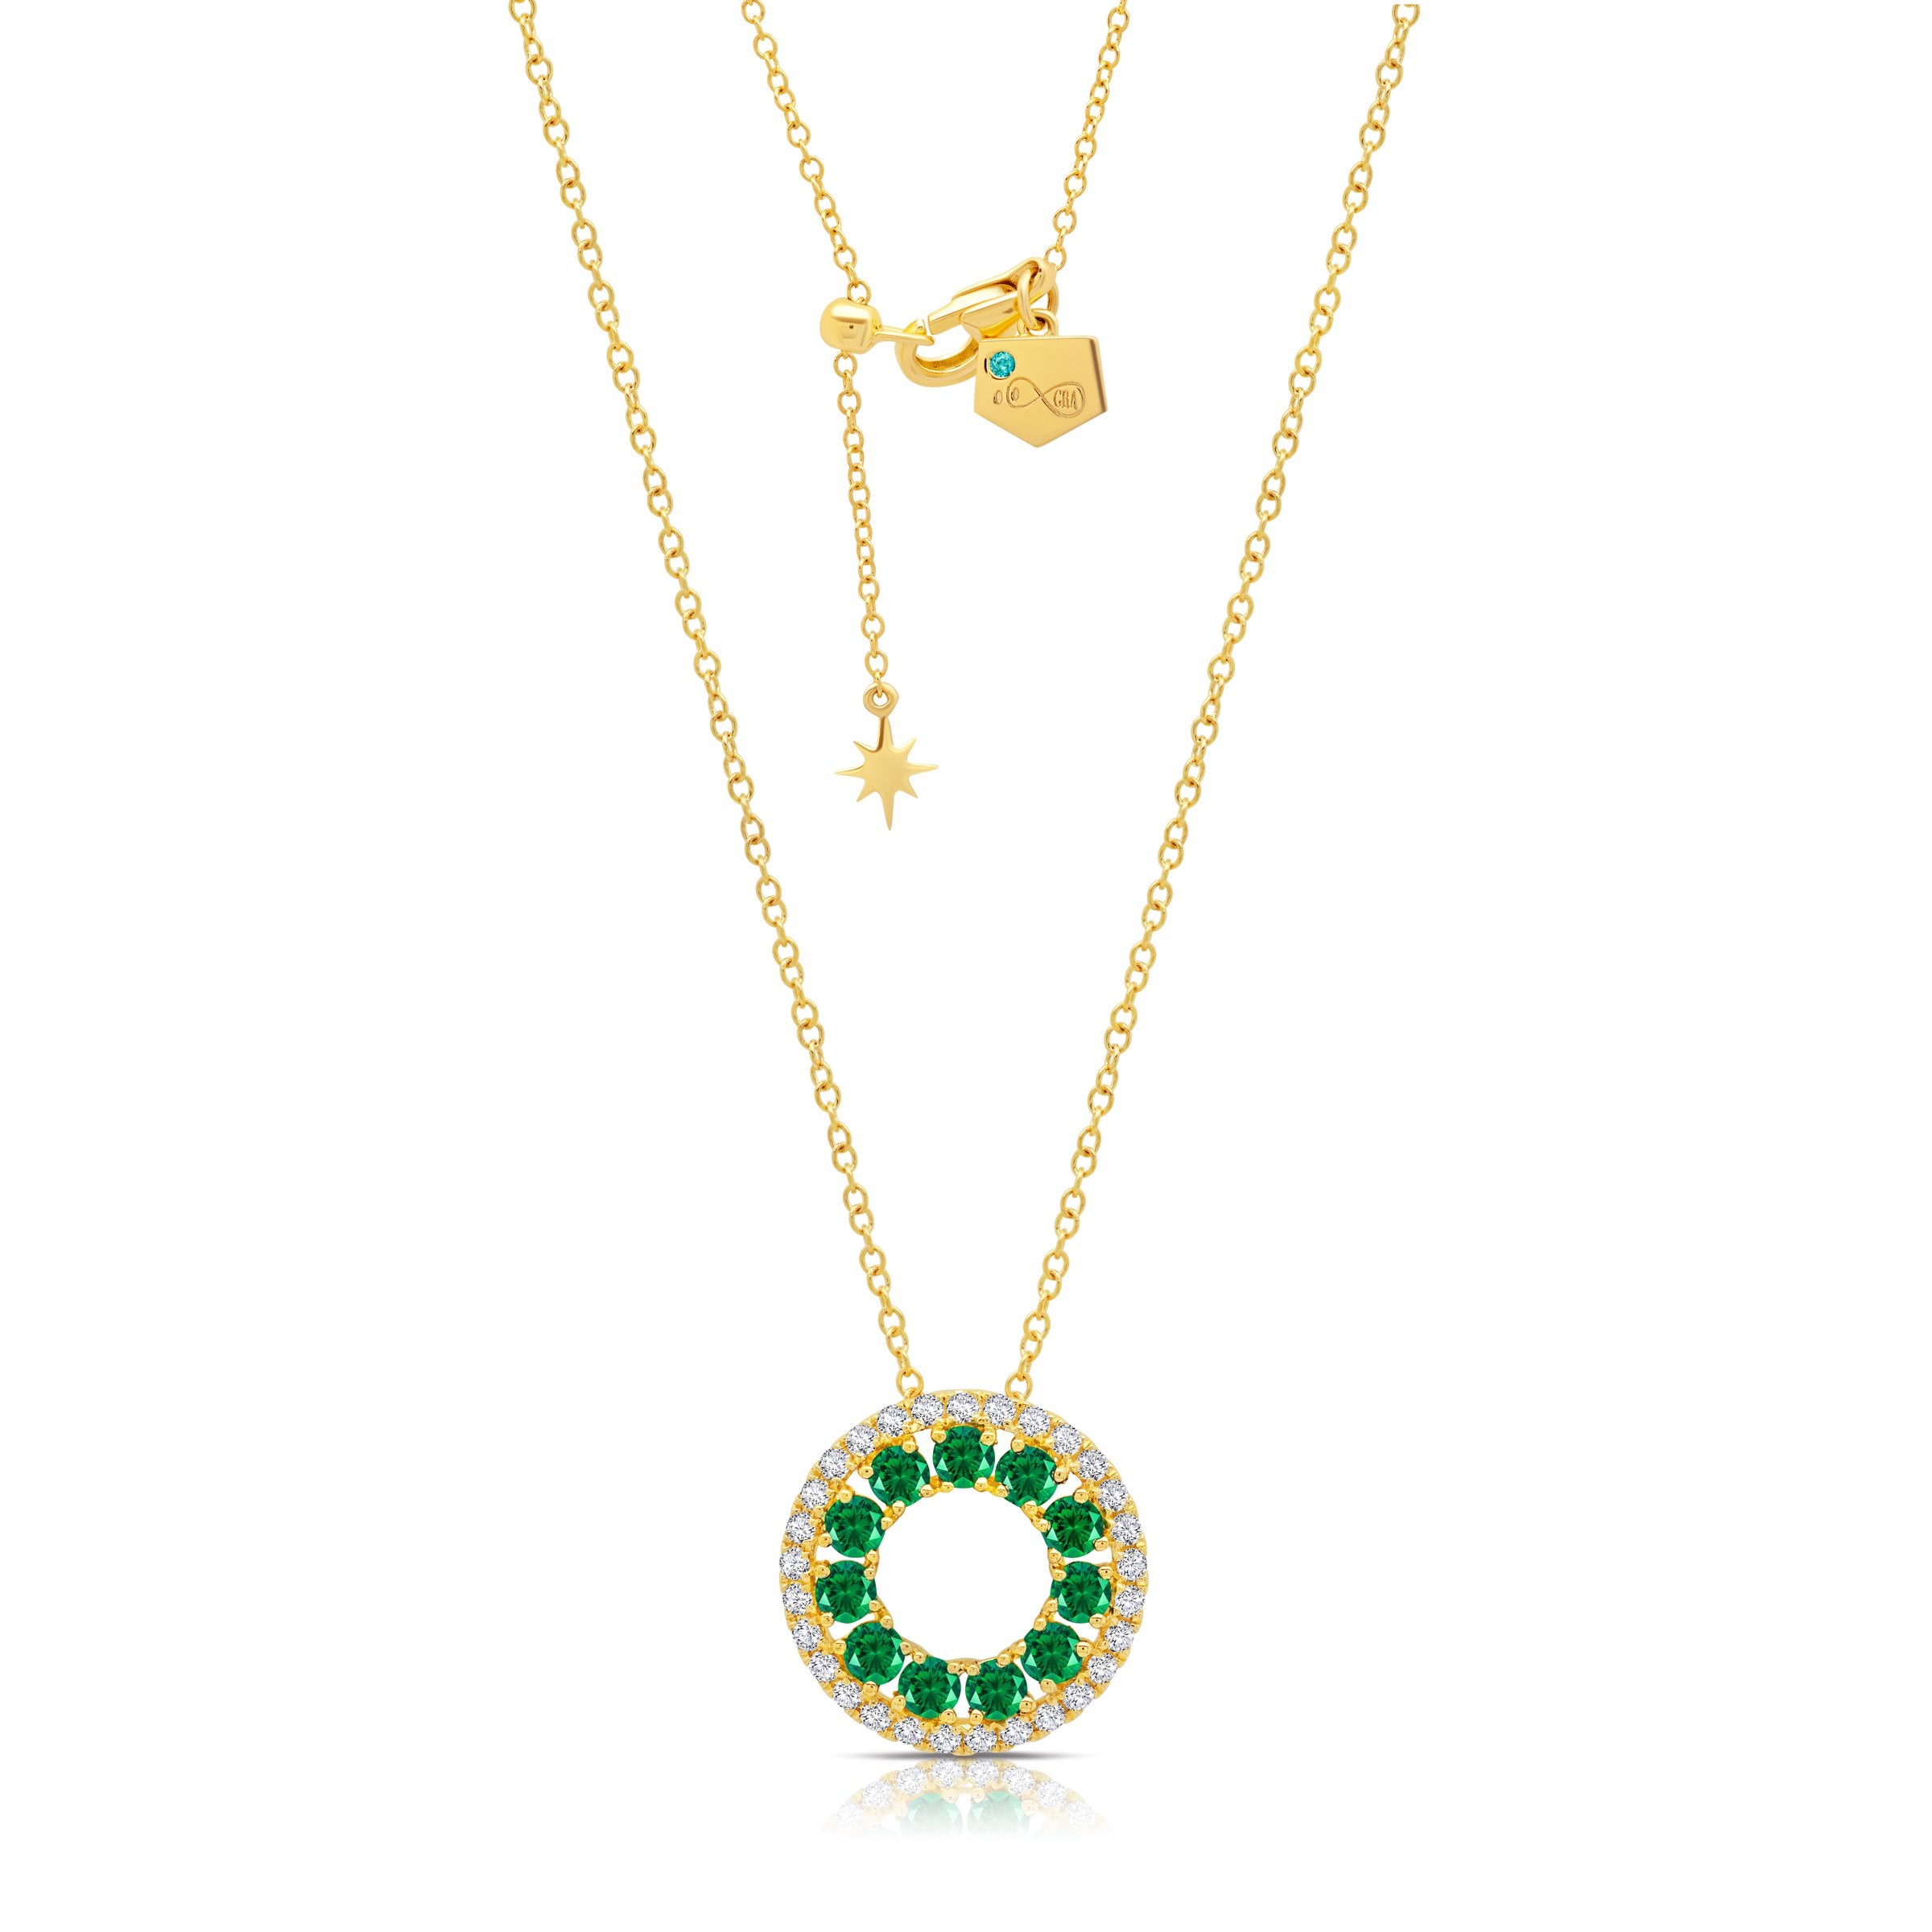 Graziela Gems - Necklace - Emerald 3 Sided Circle Necklace in Yellow Gold - 